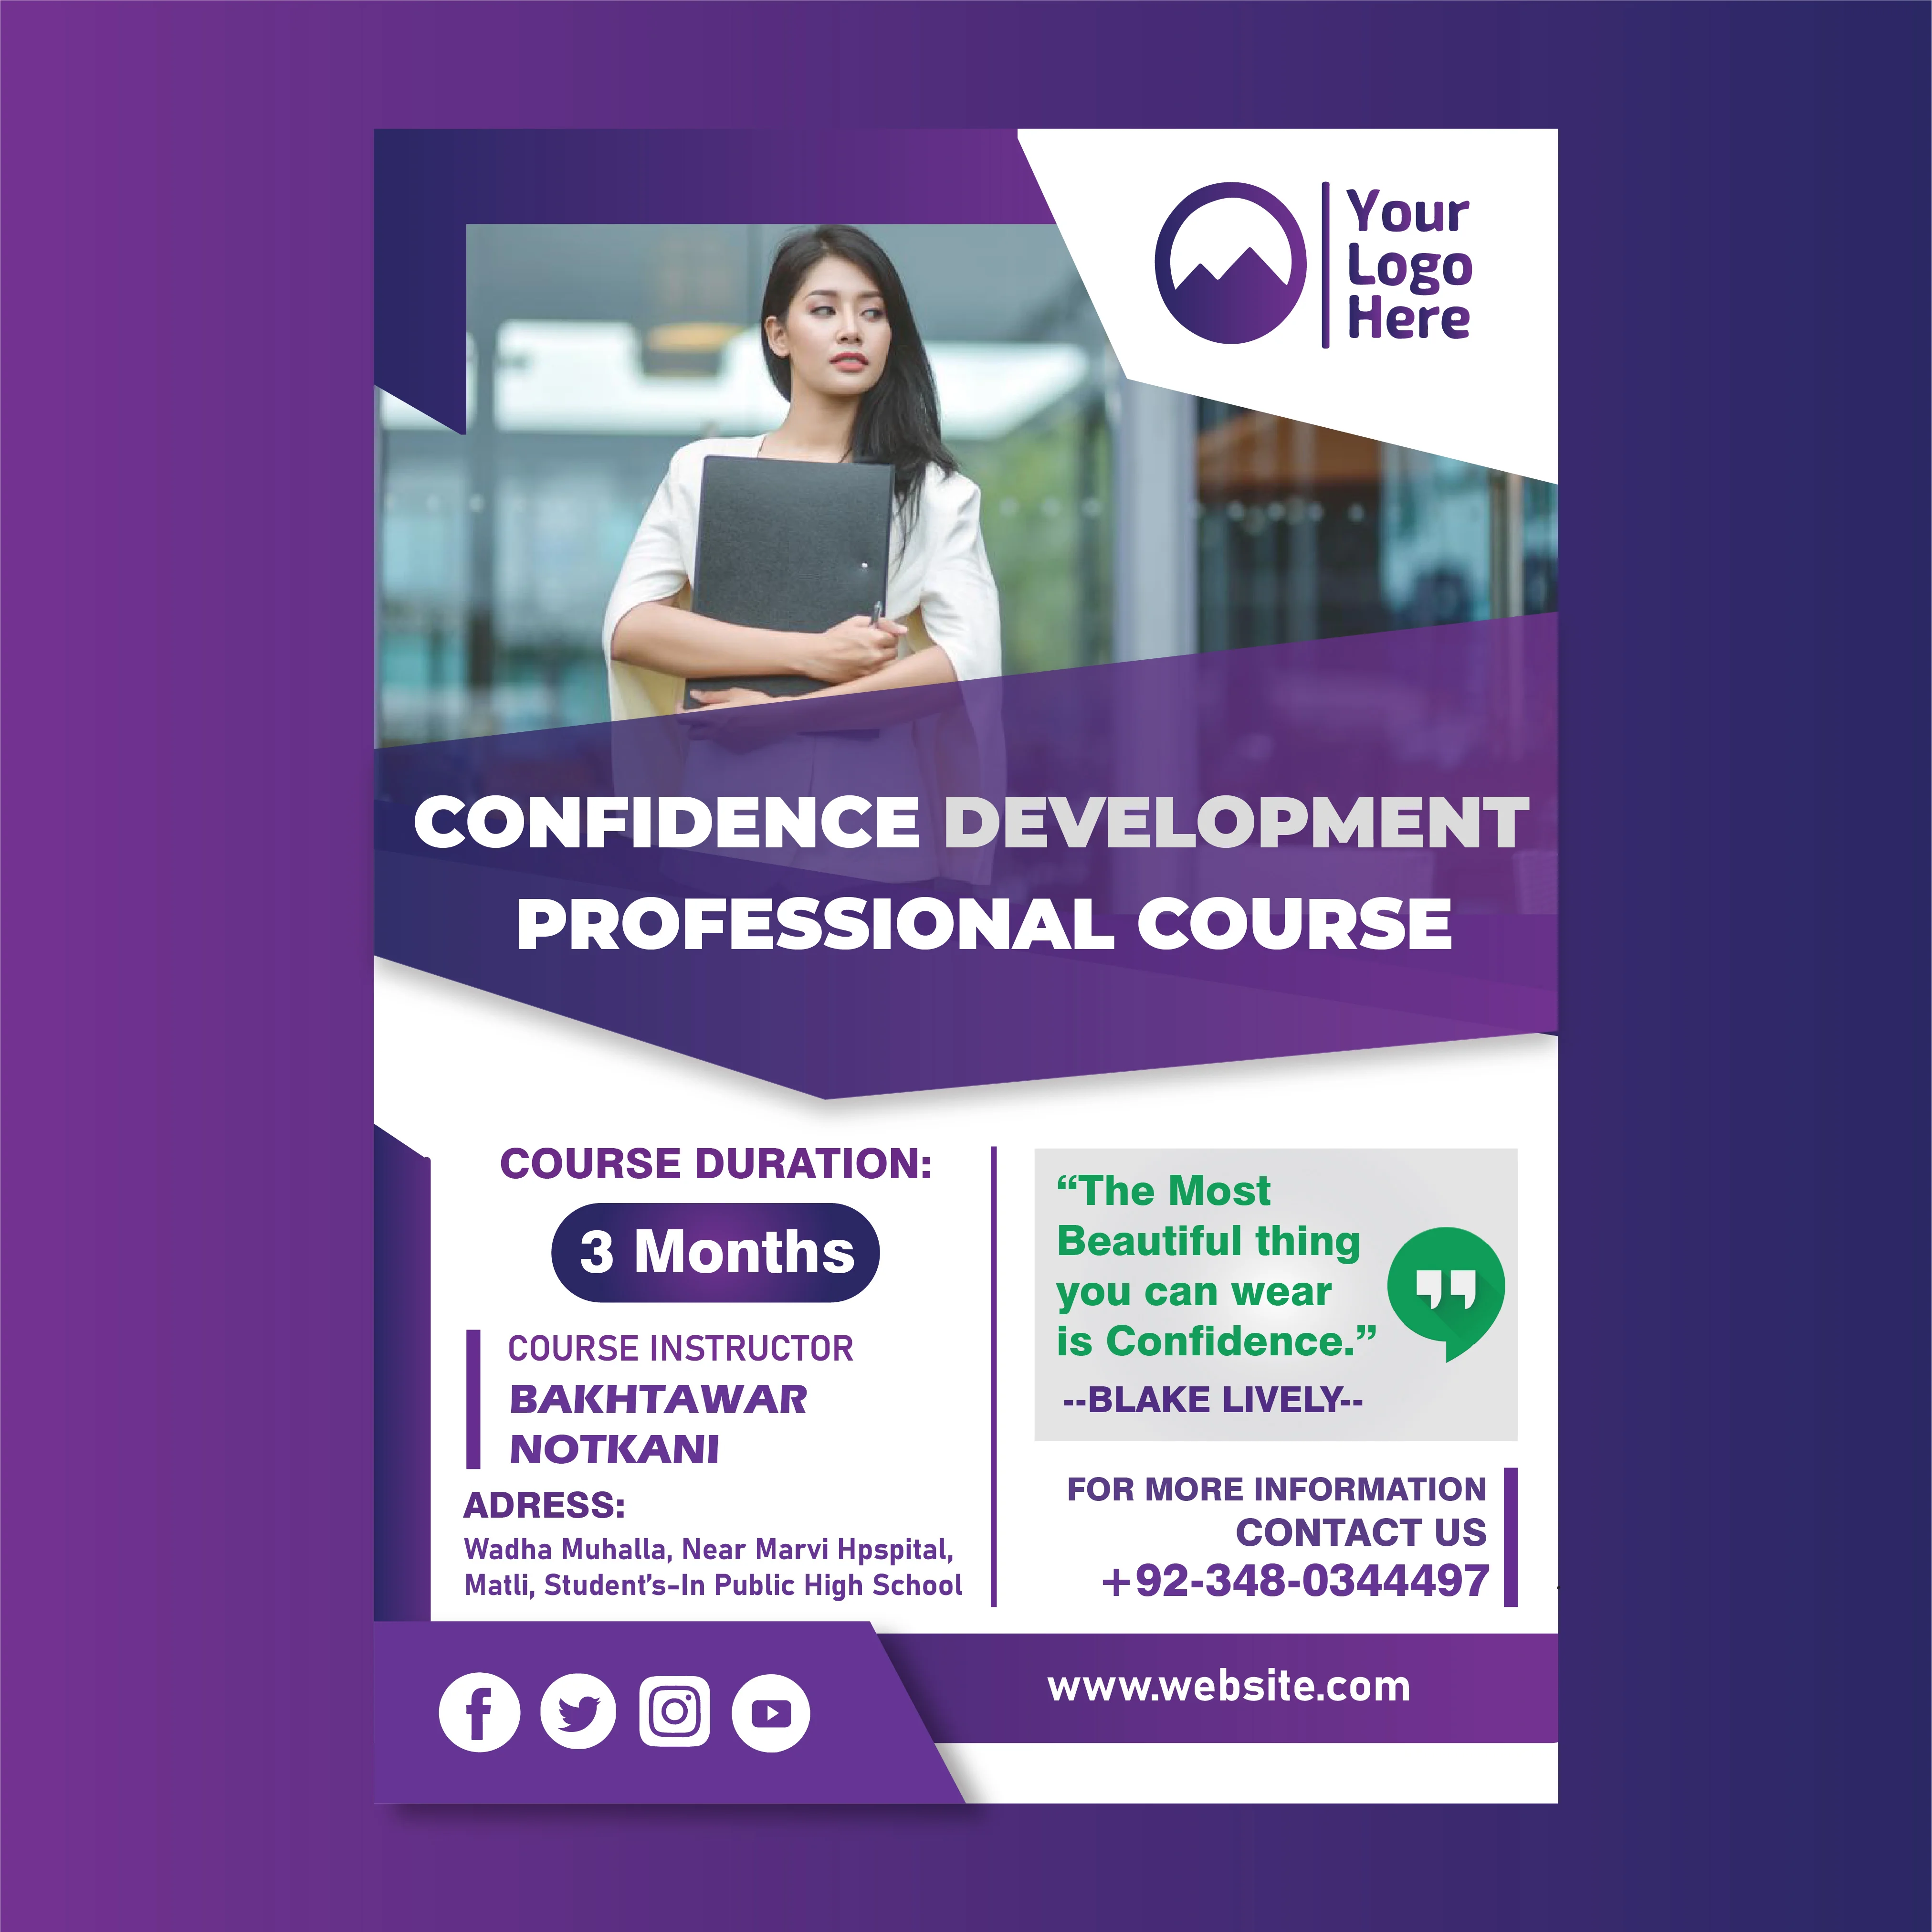 Professional Course Flyer in Illustrator